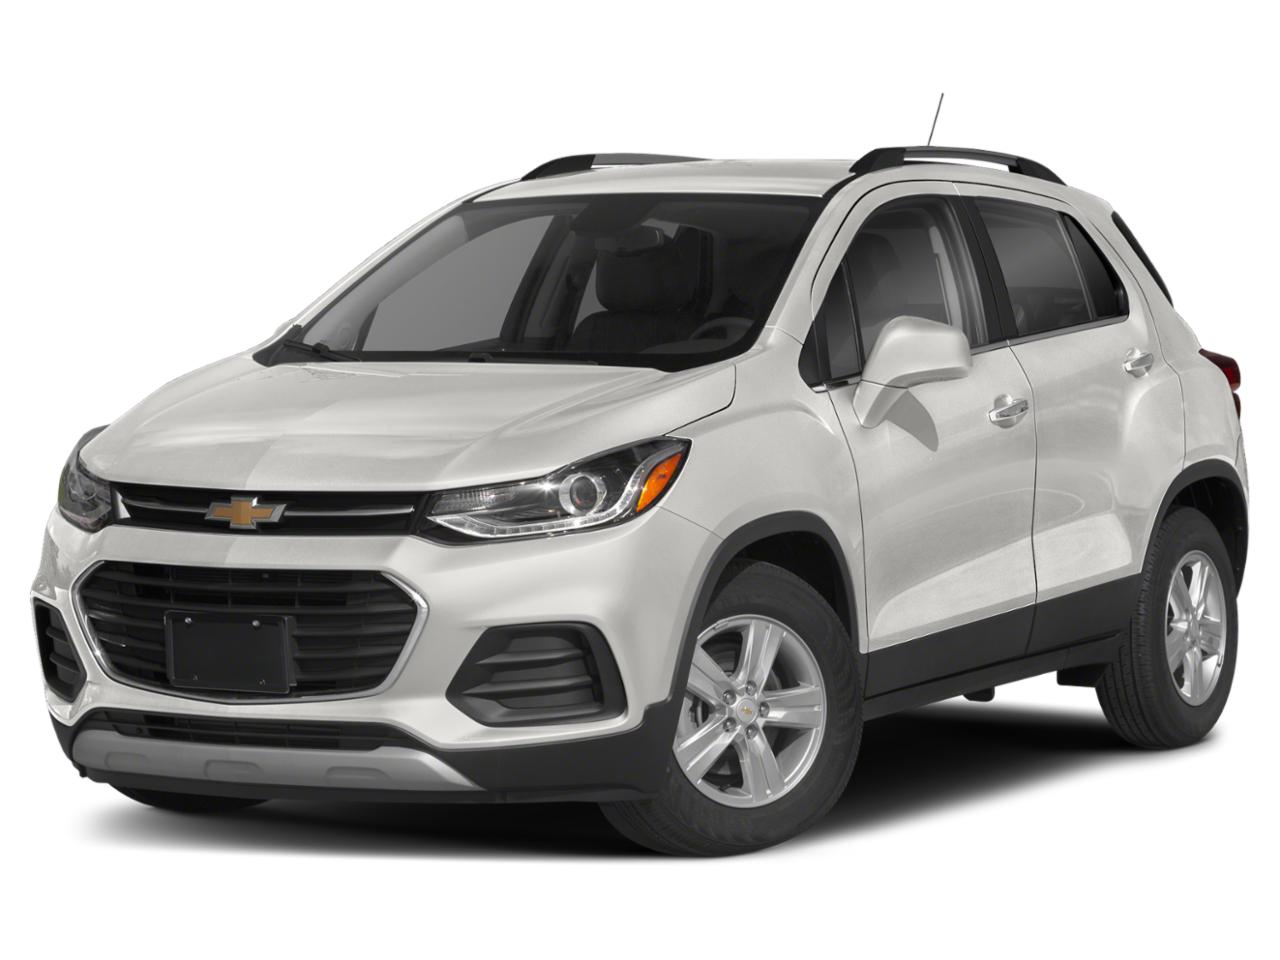 2020 Chevrolet Trax Vehicle Photo in PORTSMOUTH, NH 03801-4196